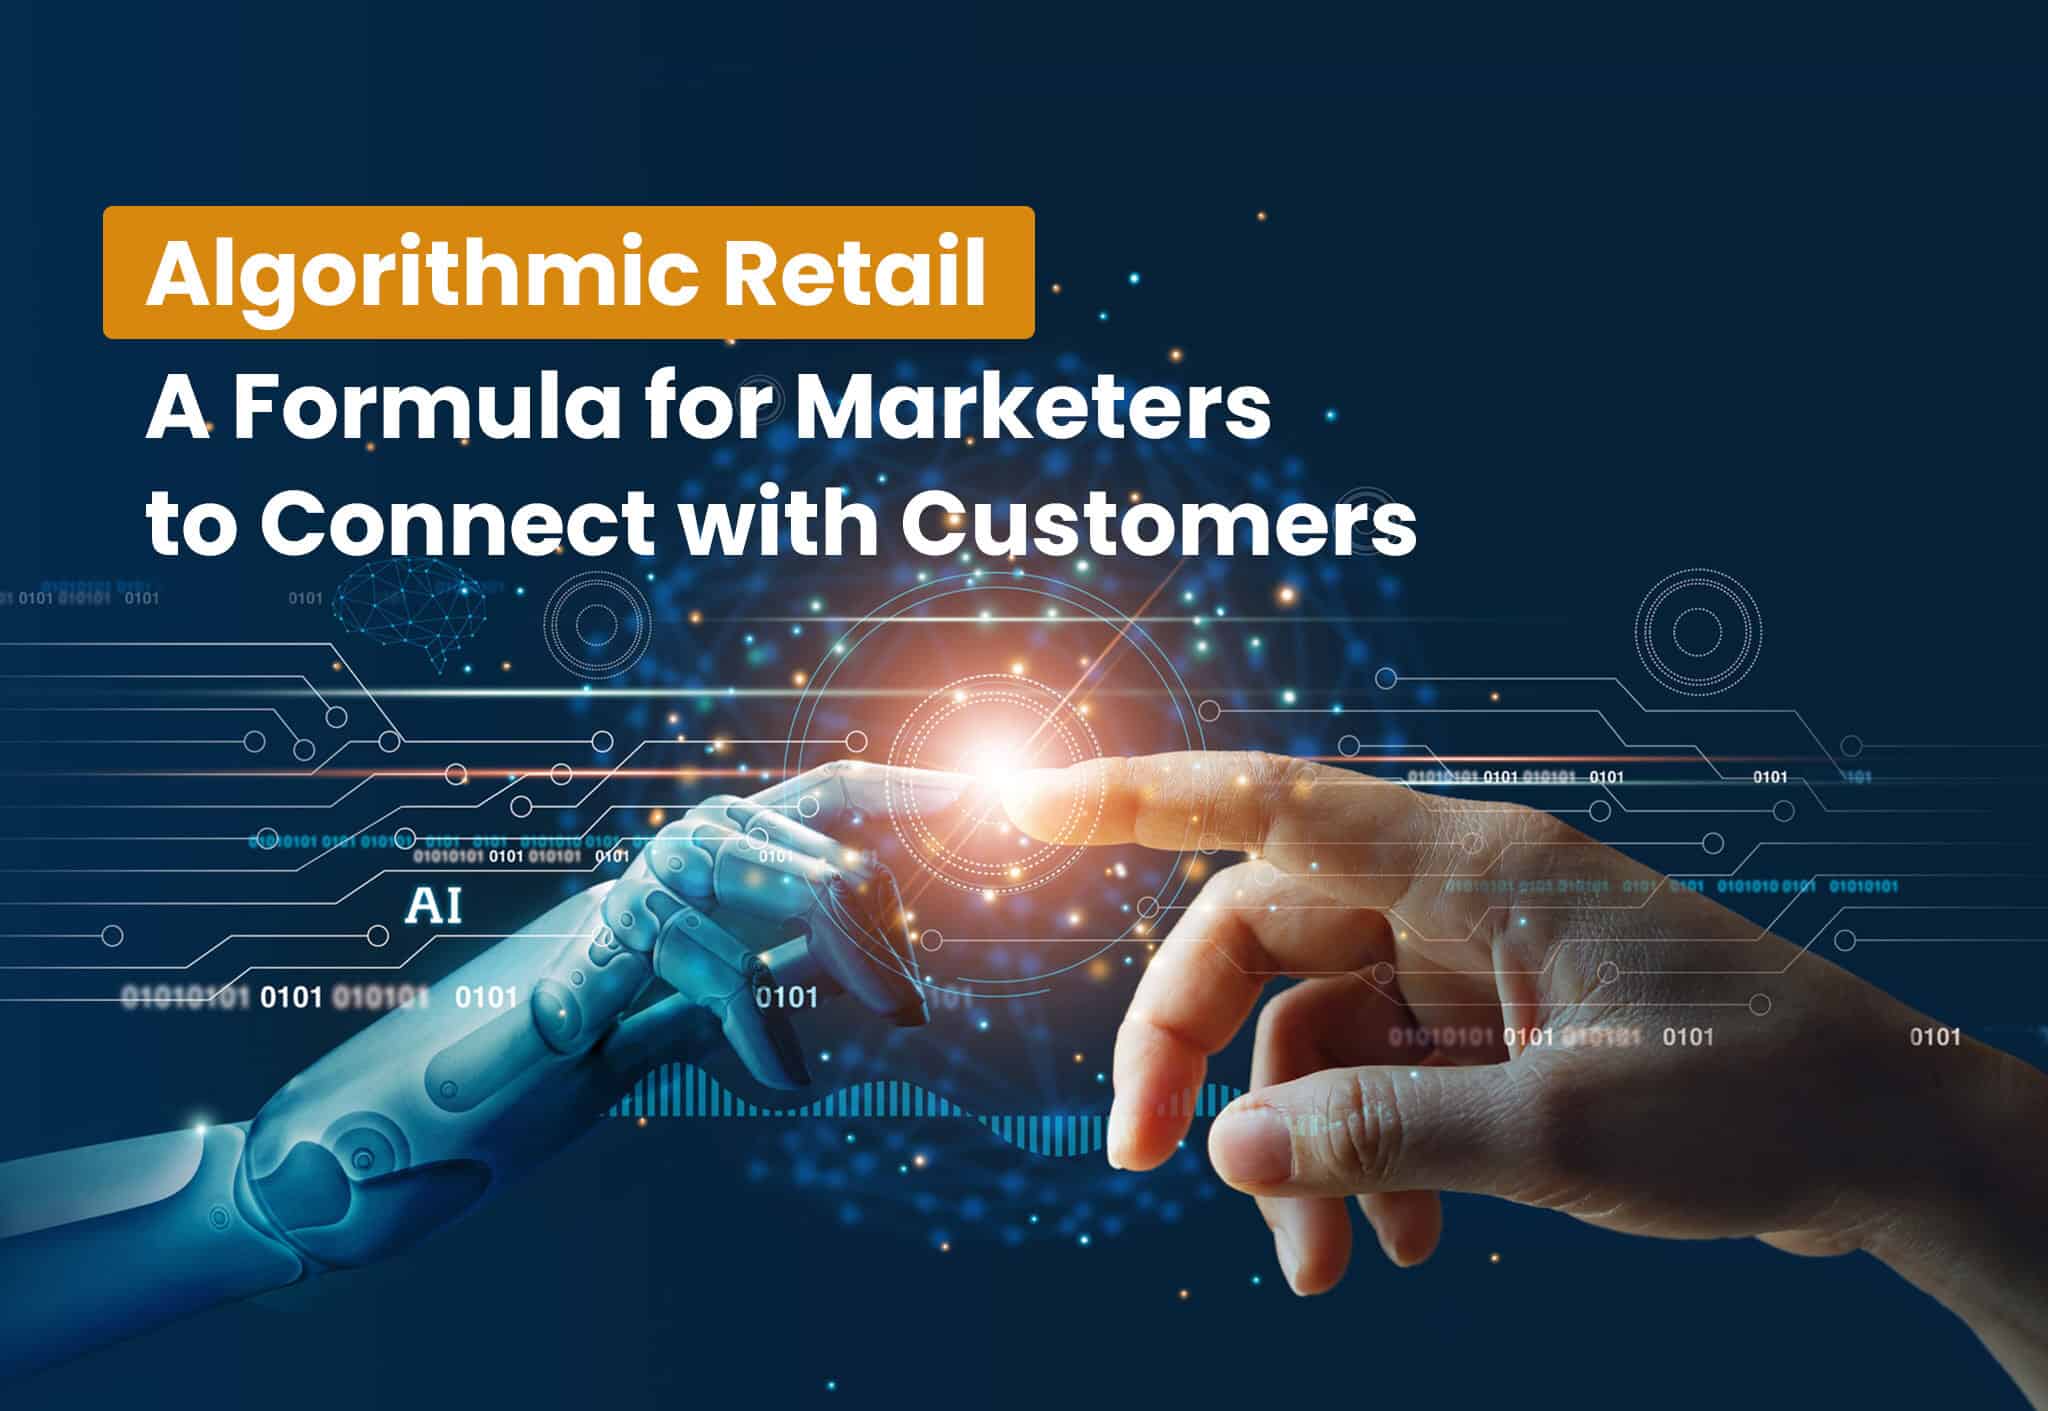 Algorithmic Retail: A Formula for Marketers to Connect with Customers